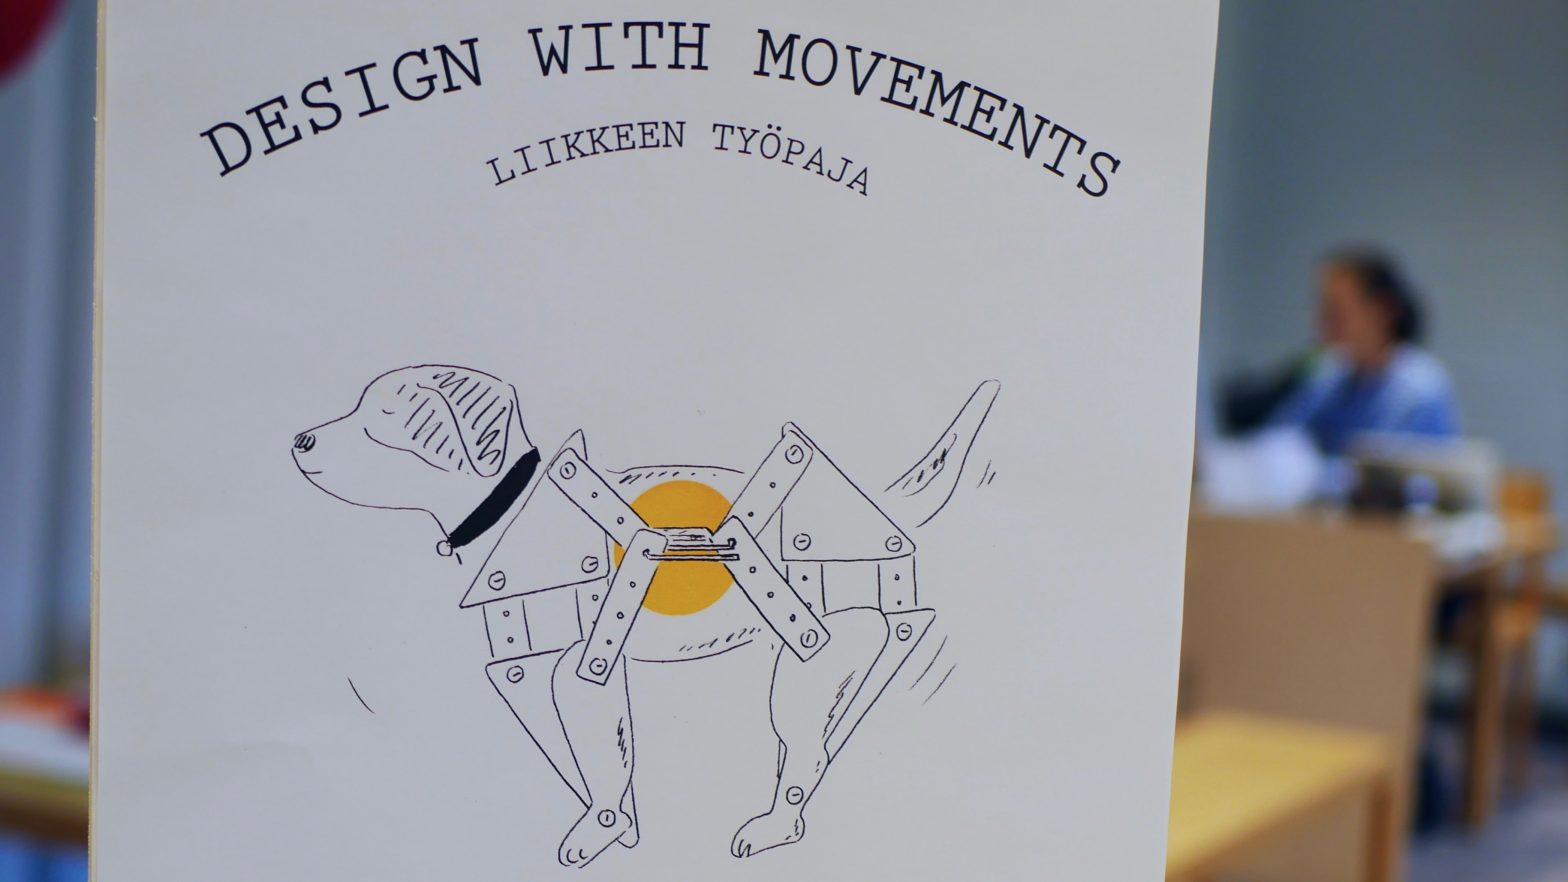 Playful prototyping at “Design with Movements” -workshop